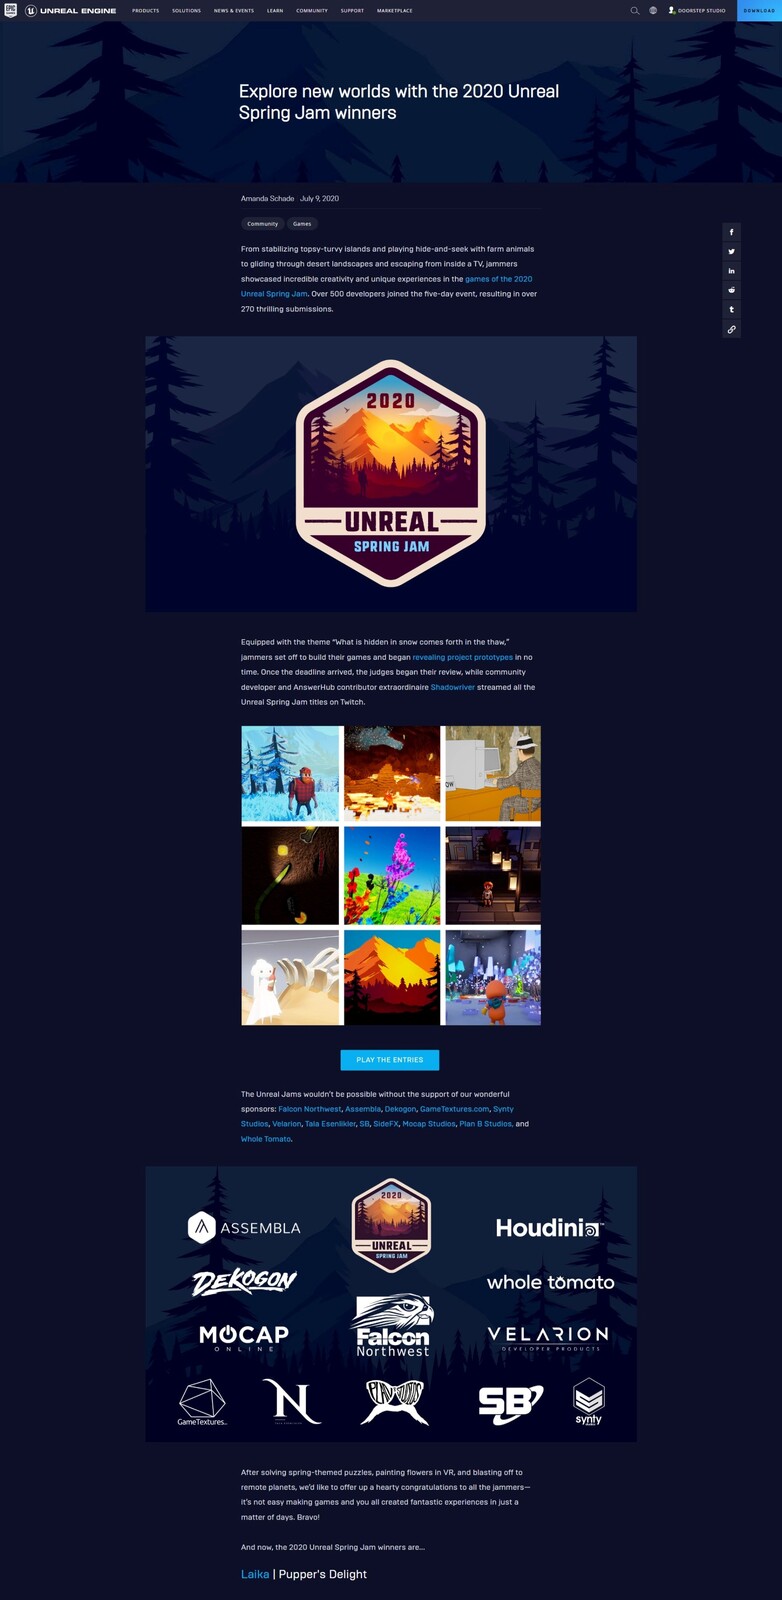 Featured in official Unreal Engine Spring Jam 2020 Website: https://www.unrealengine.com/en-US/blog/explore-new-worlds-with-the-2020-unreal-spring-jam-winners